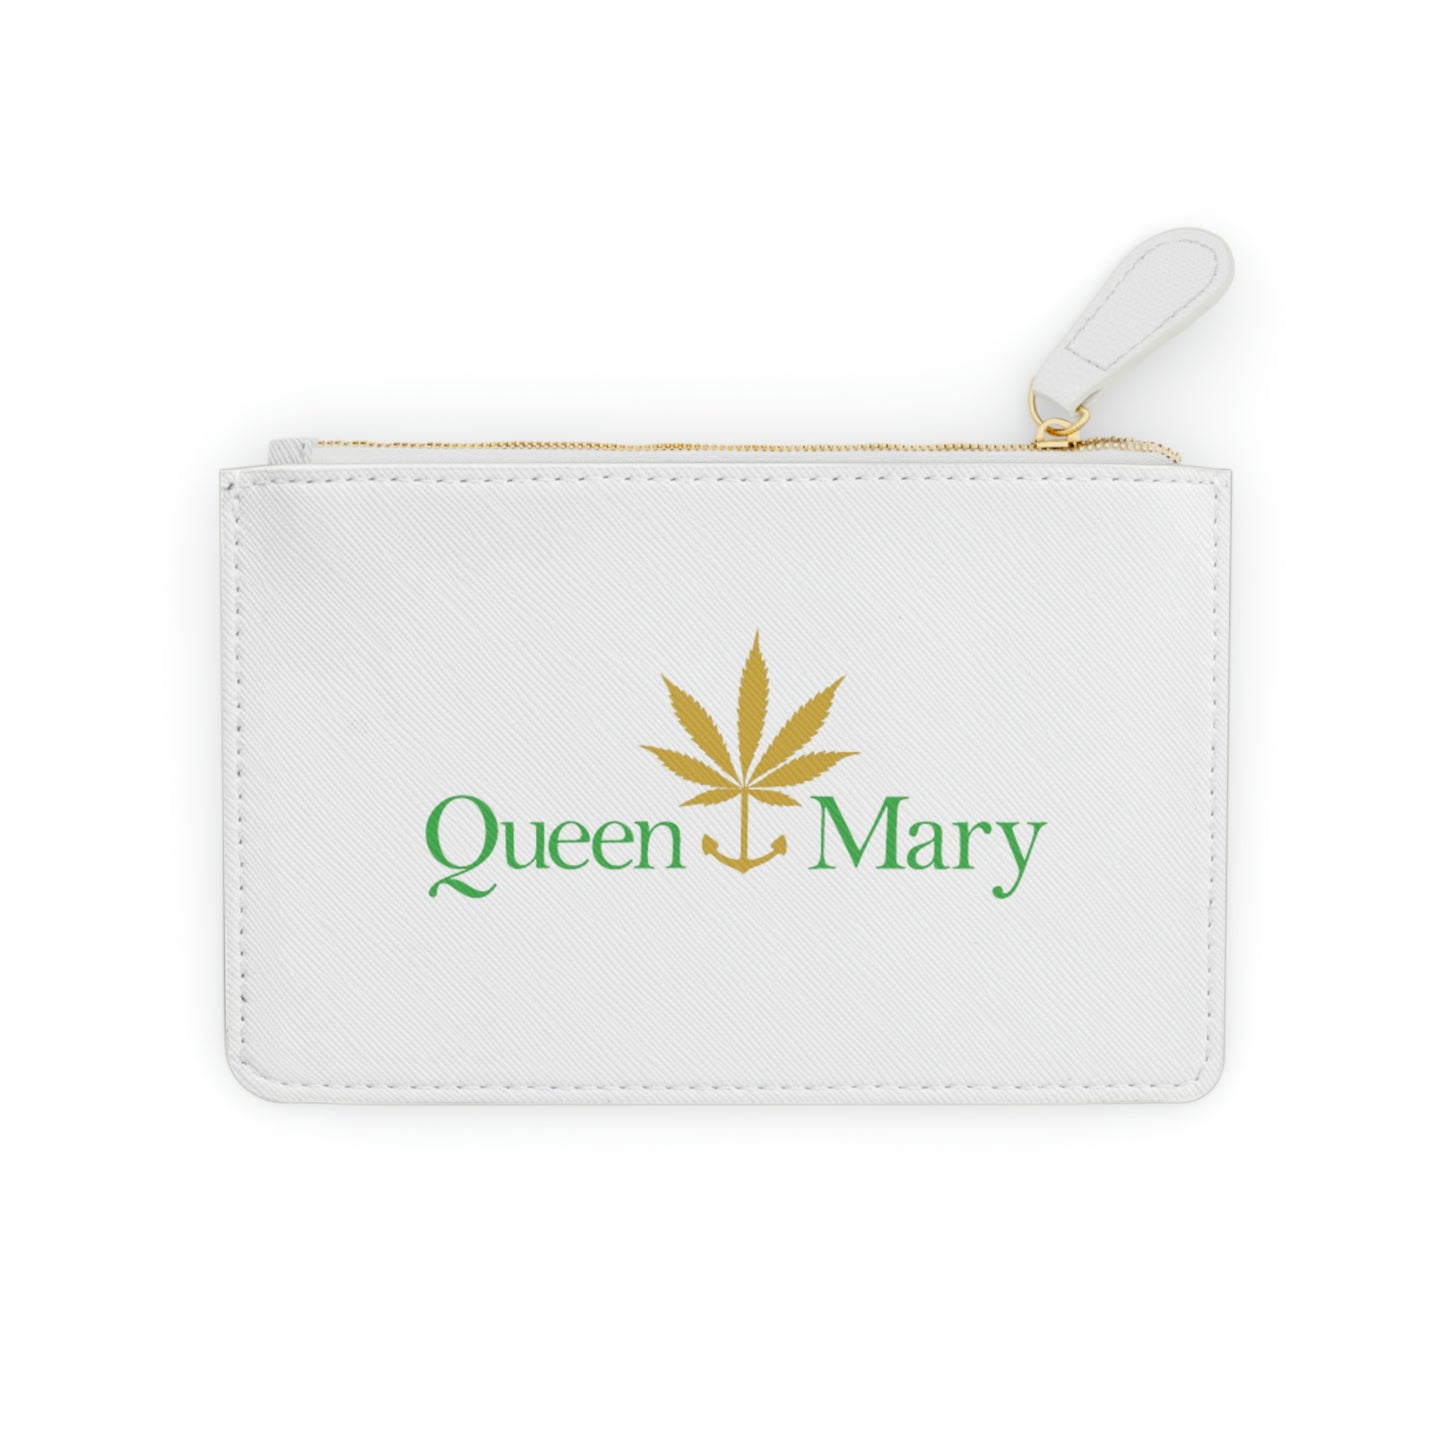 Leather Mini Clutch Bag by Queen Mary